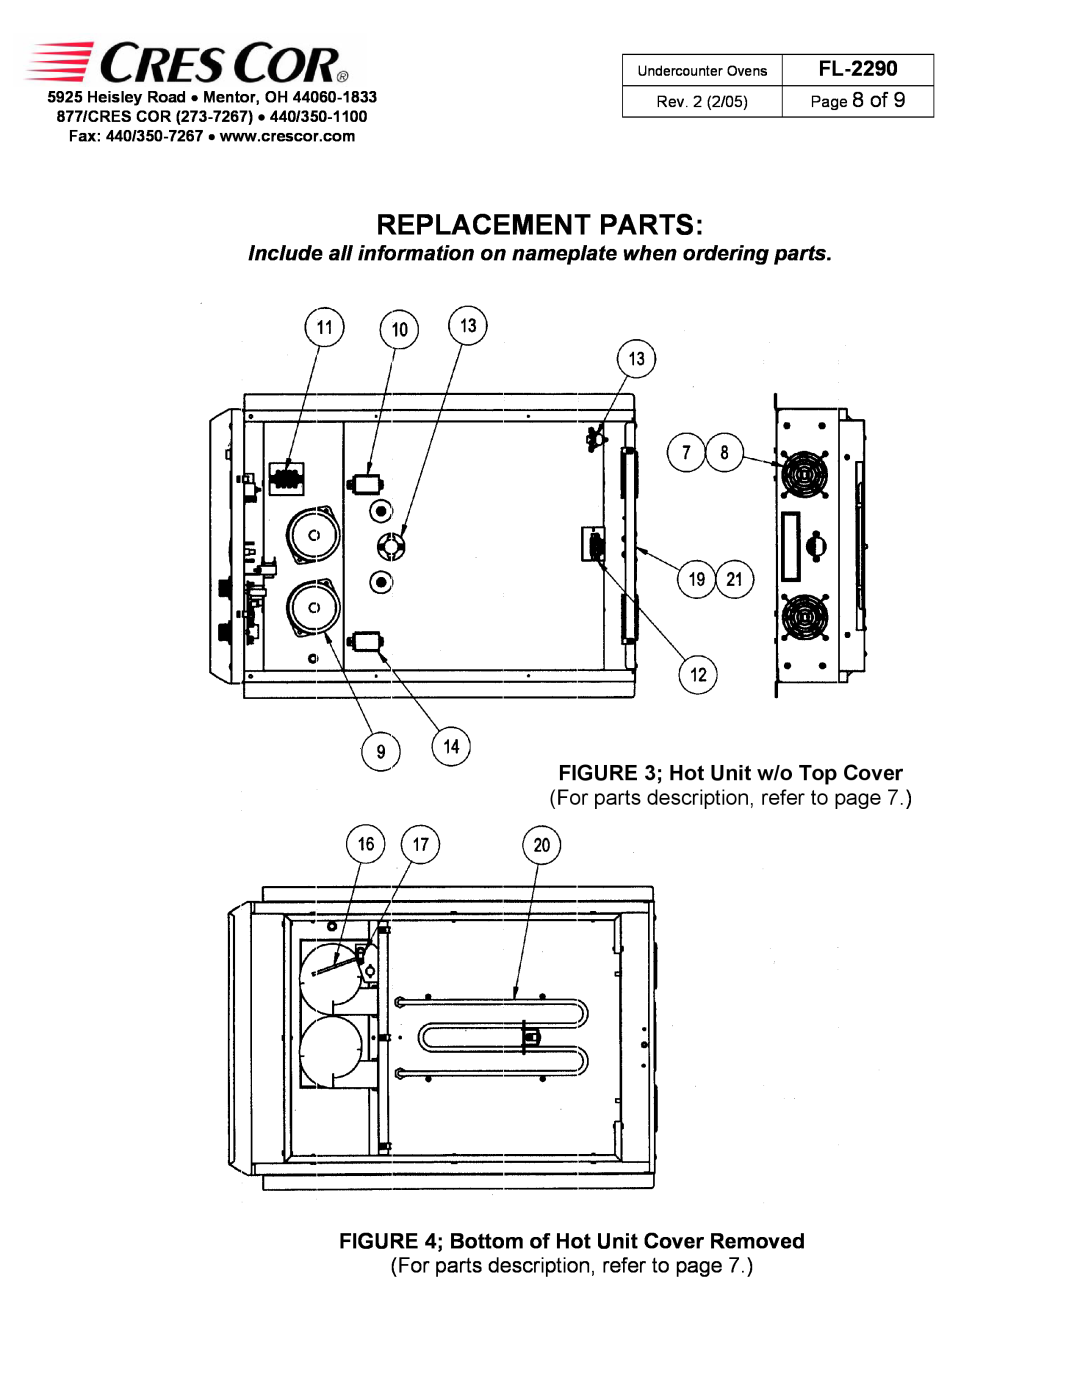 Cres Cor CO151X185B manual Replacement Parts, FL-2290, Bottom of Hot Unit Cover Removed, Rev. 2 2/05, Undercounter Ovens 